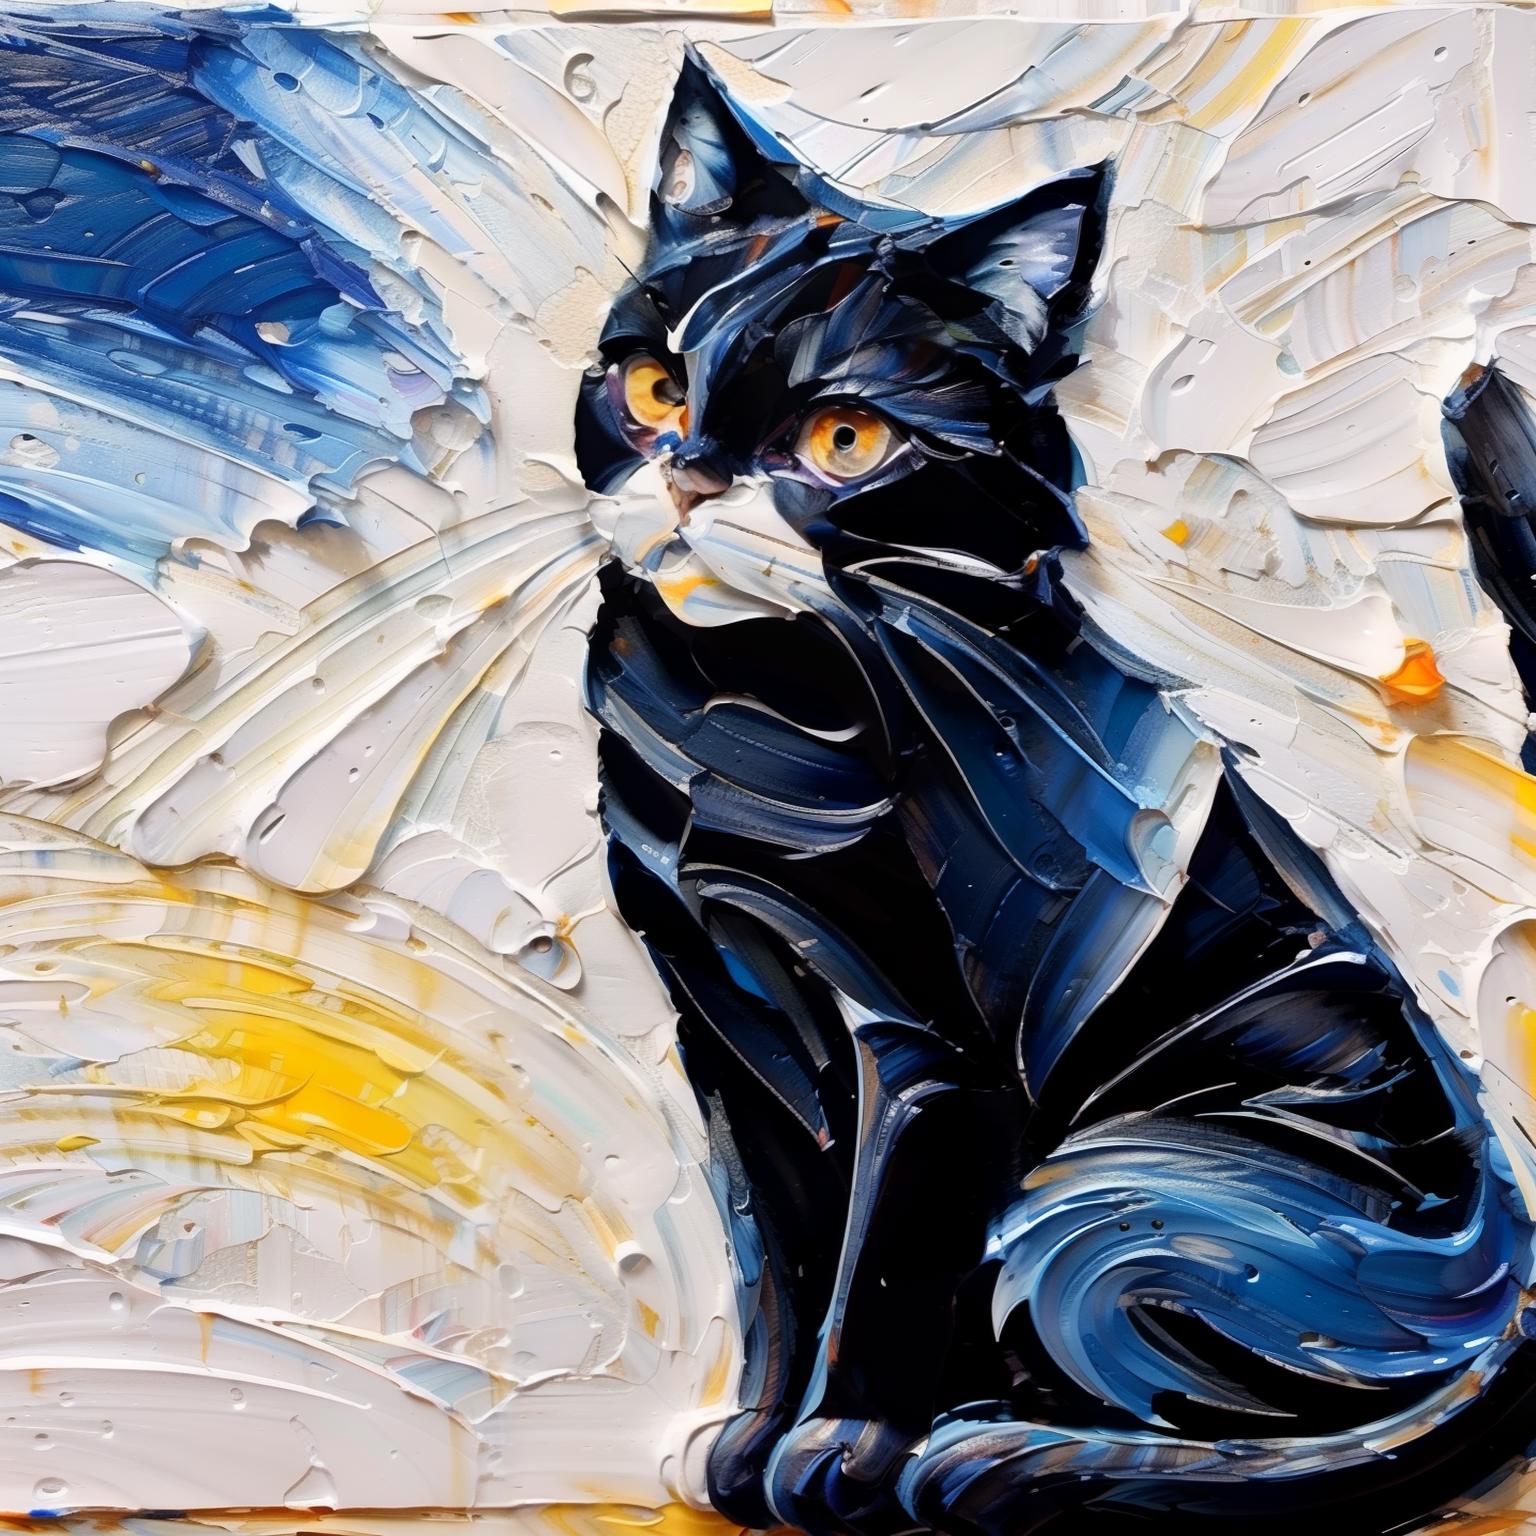 A black cat with orange eyes is painted on a canvas.